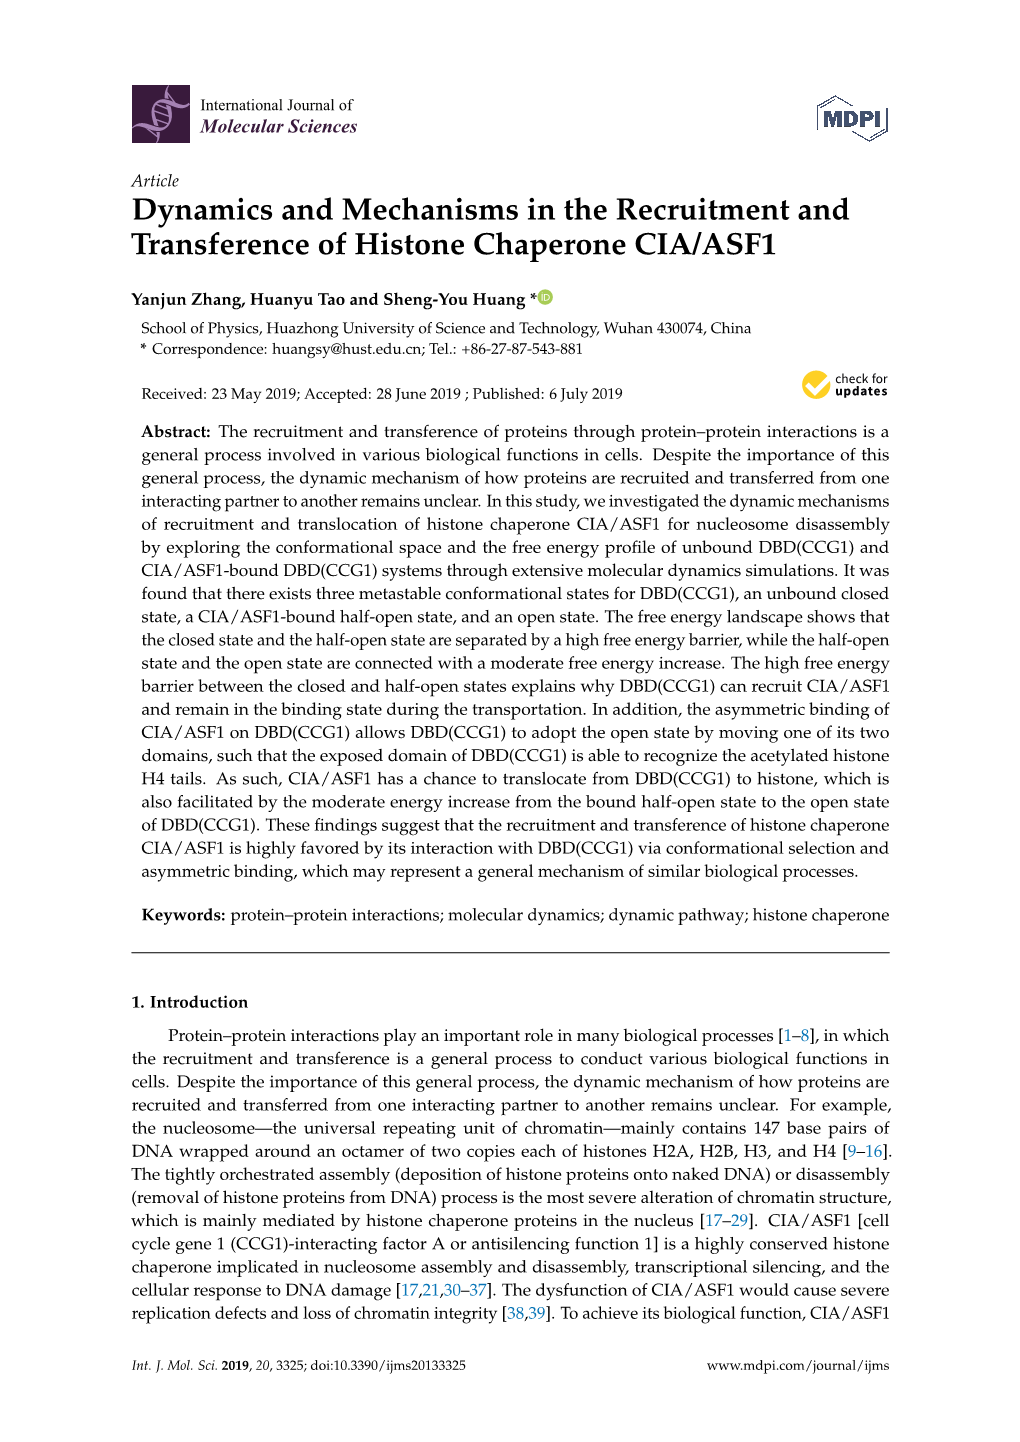 Dynamics and Mechanisms in the Recruitment and Transference of Histone Chaperone CIA/ASF1